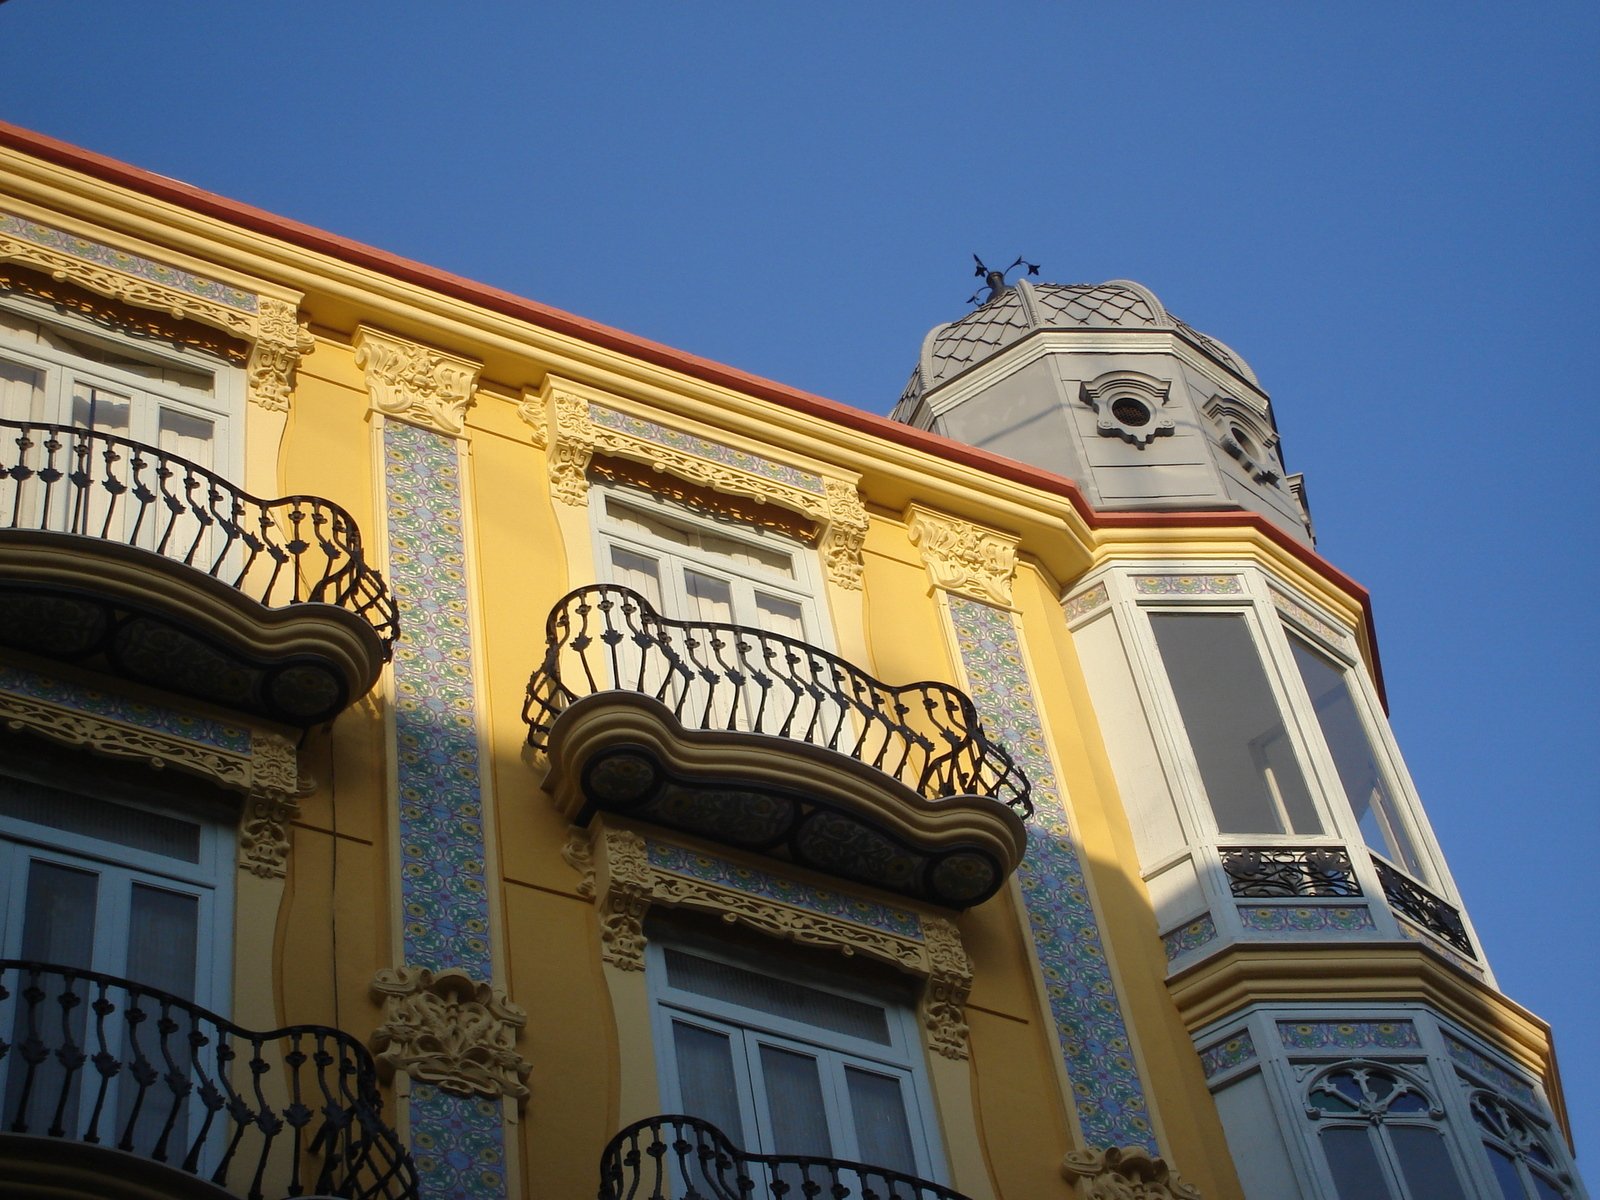 a tall yellow building with ornate balcony railings